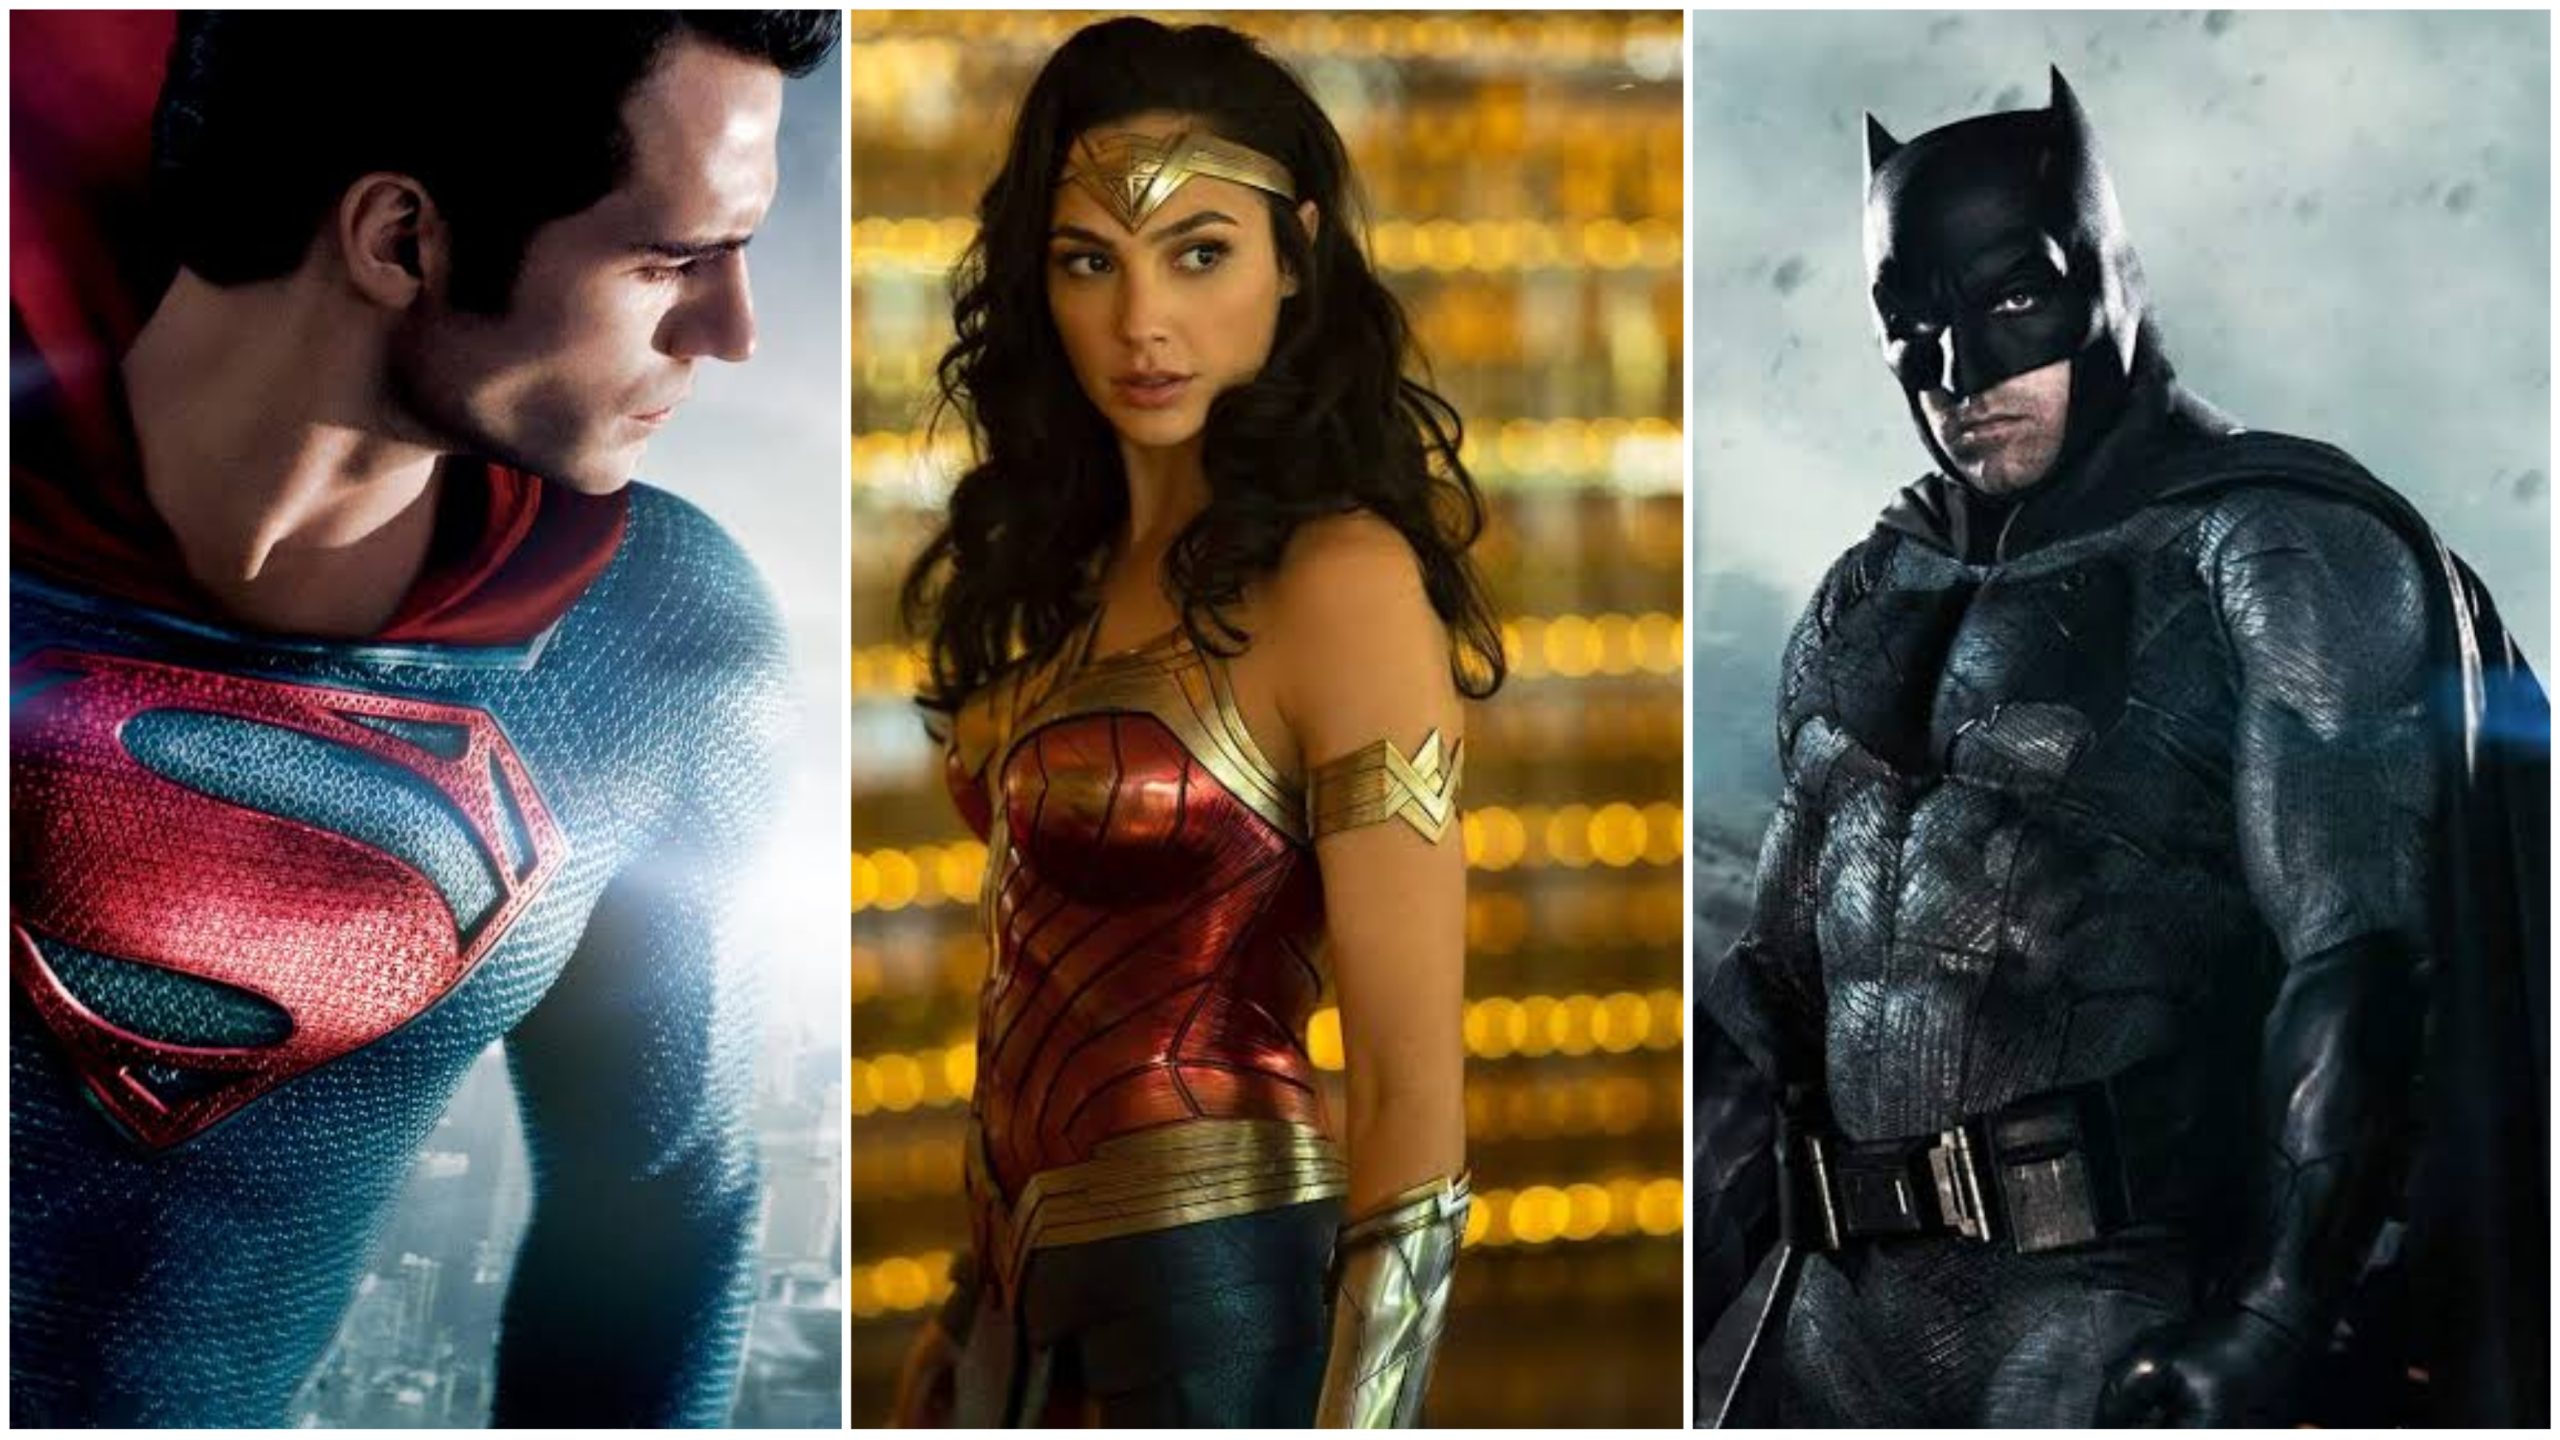 Batman, WonderWoman and Superman are iconic characters of DCEU